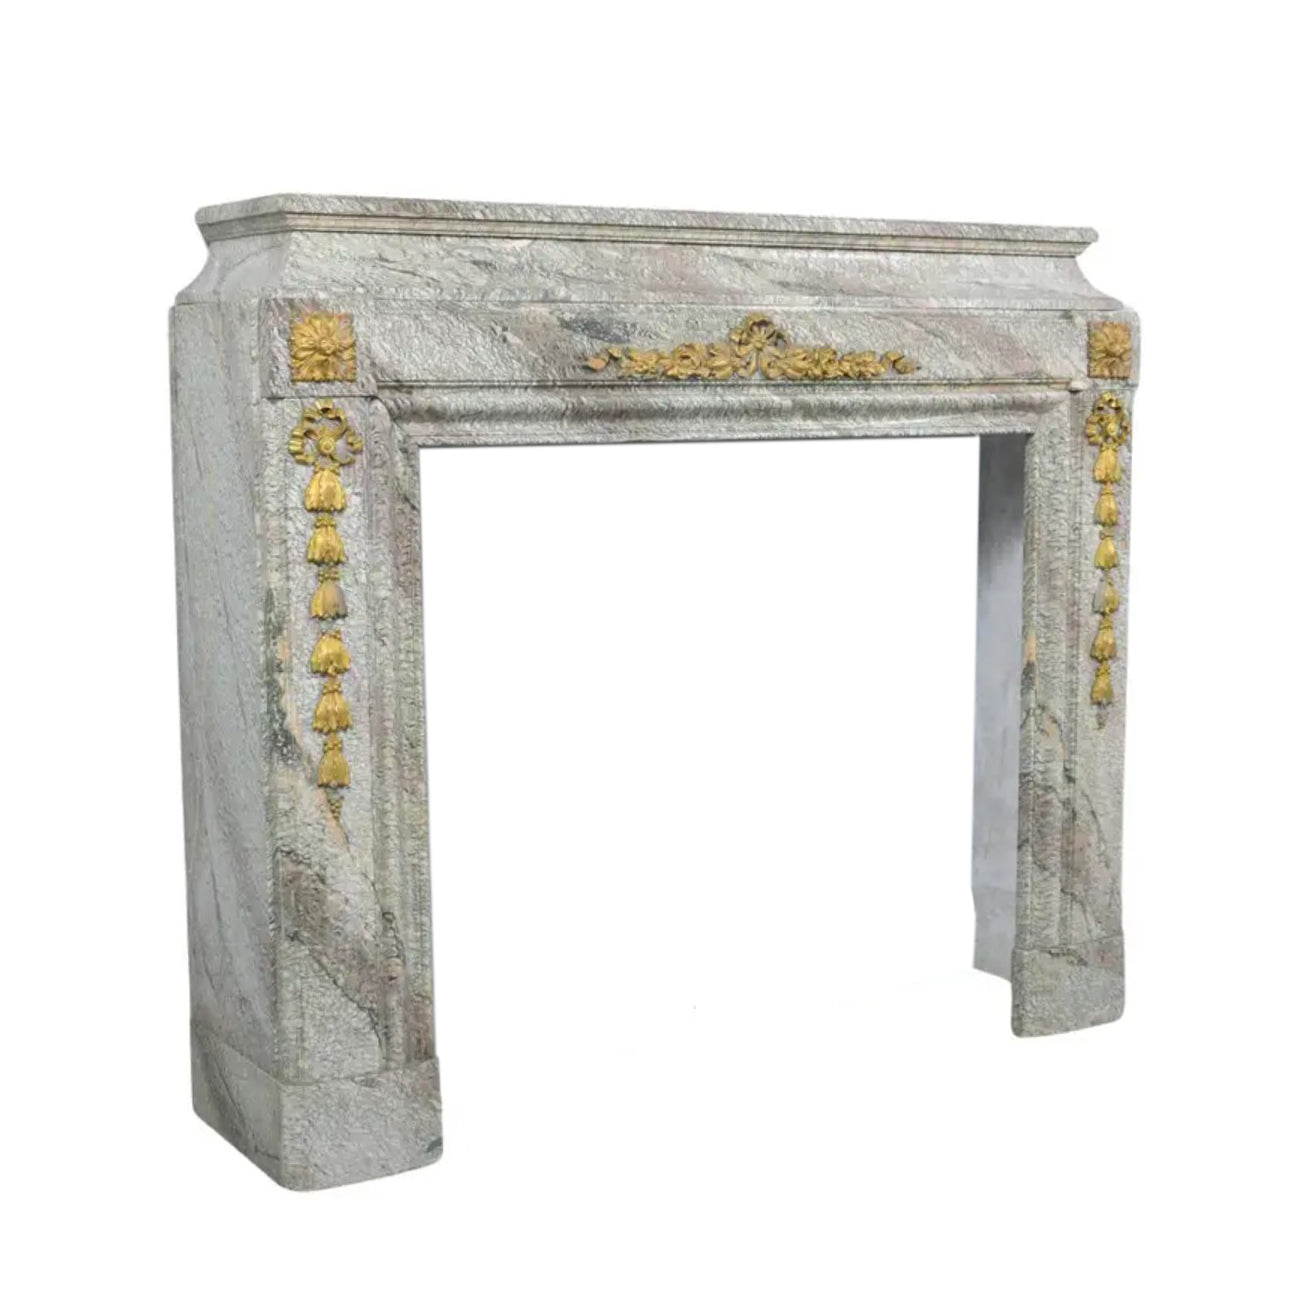 19th Century French Marble & Brass Fireplace: Restored Elegance for Your Home